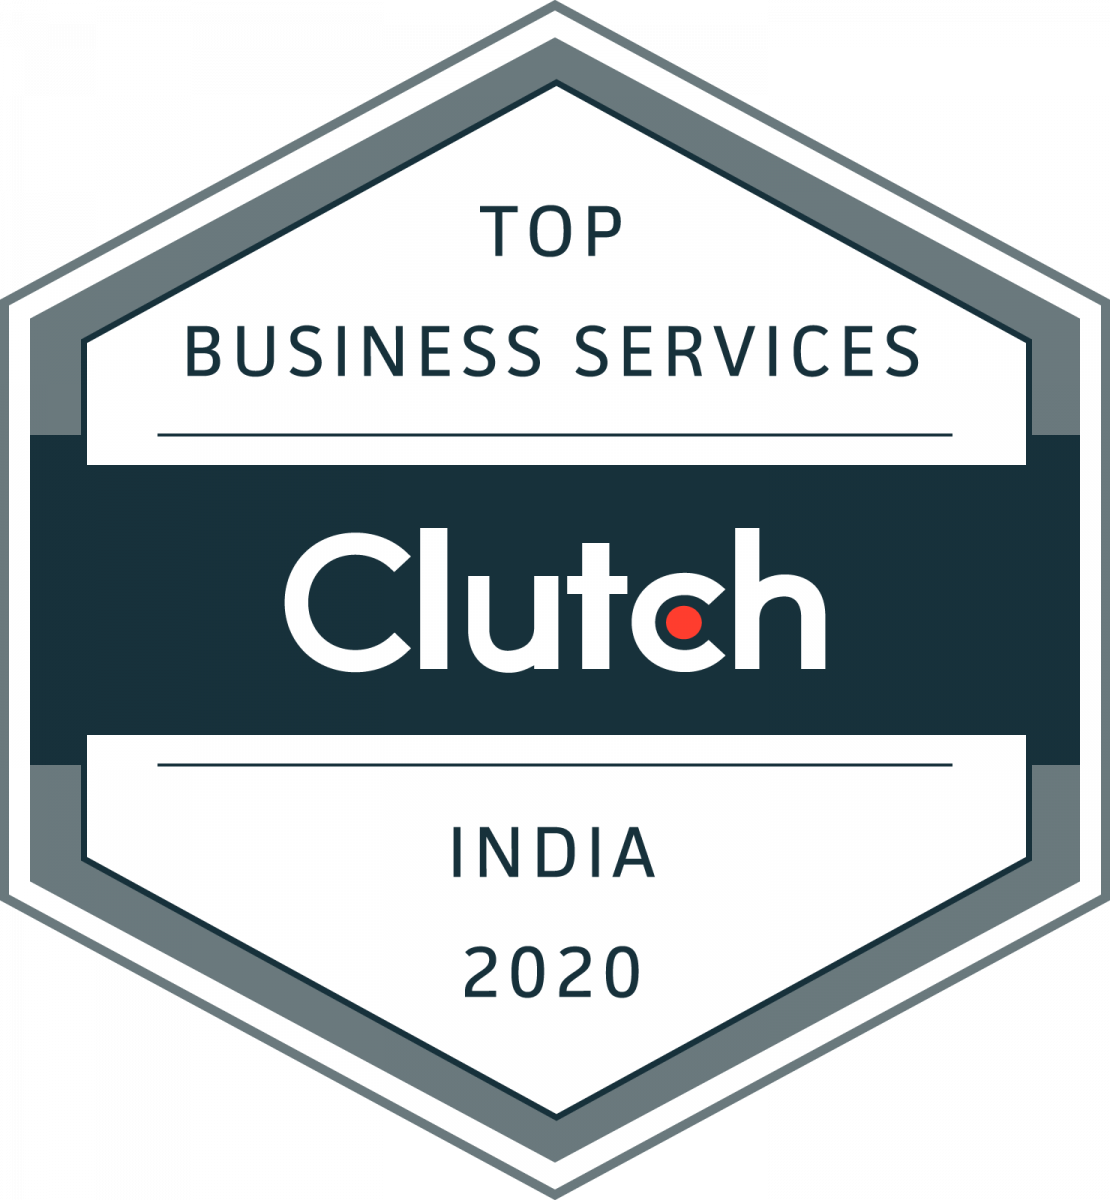 business services India 2020